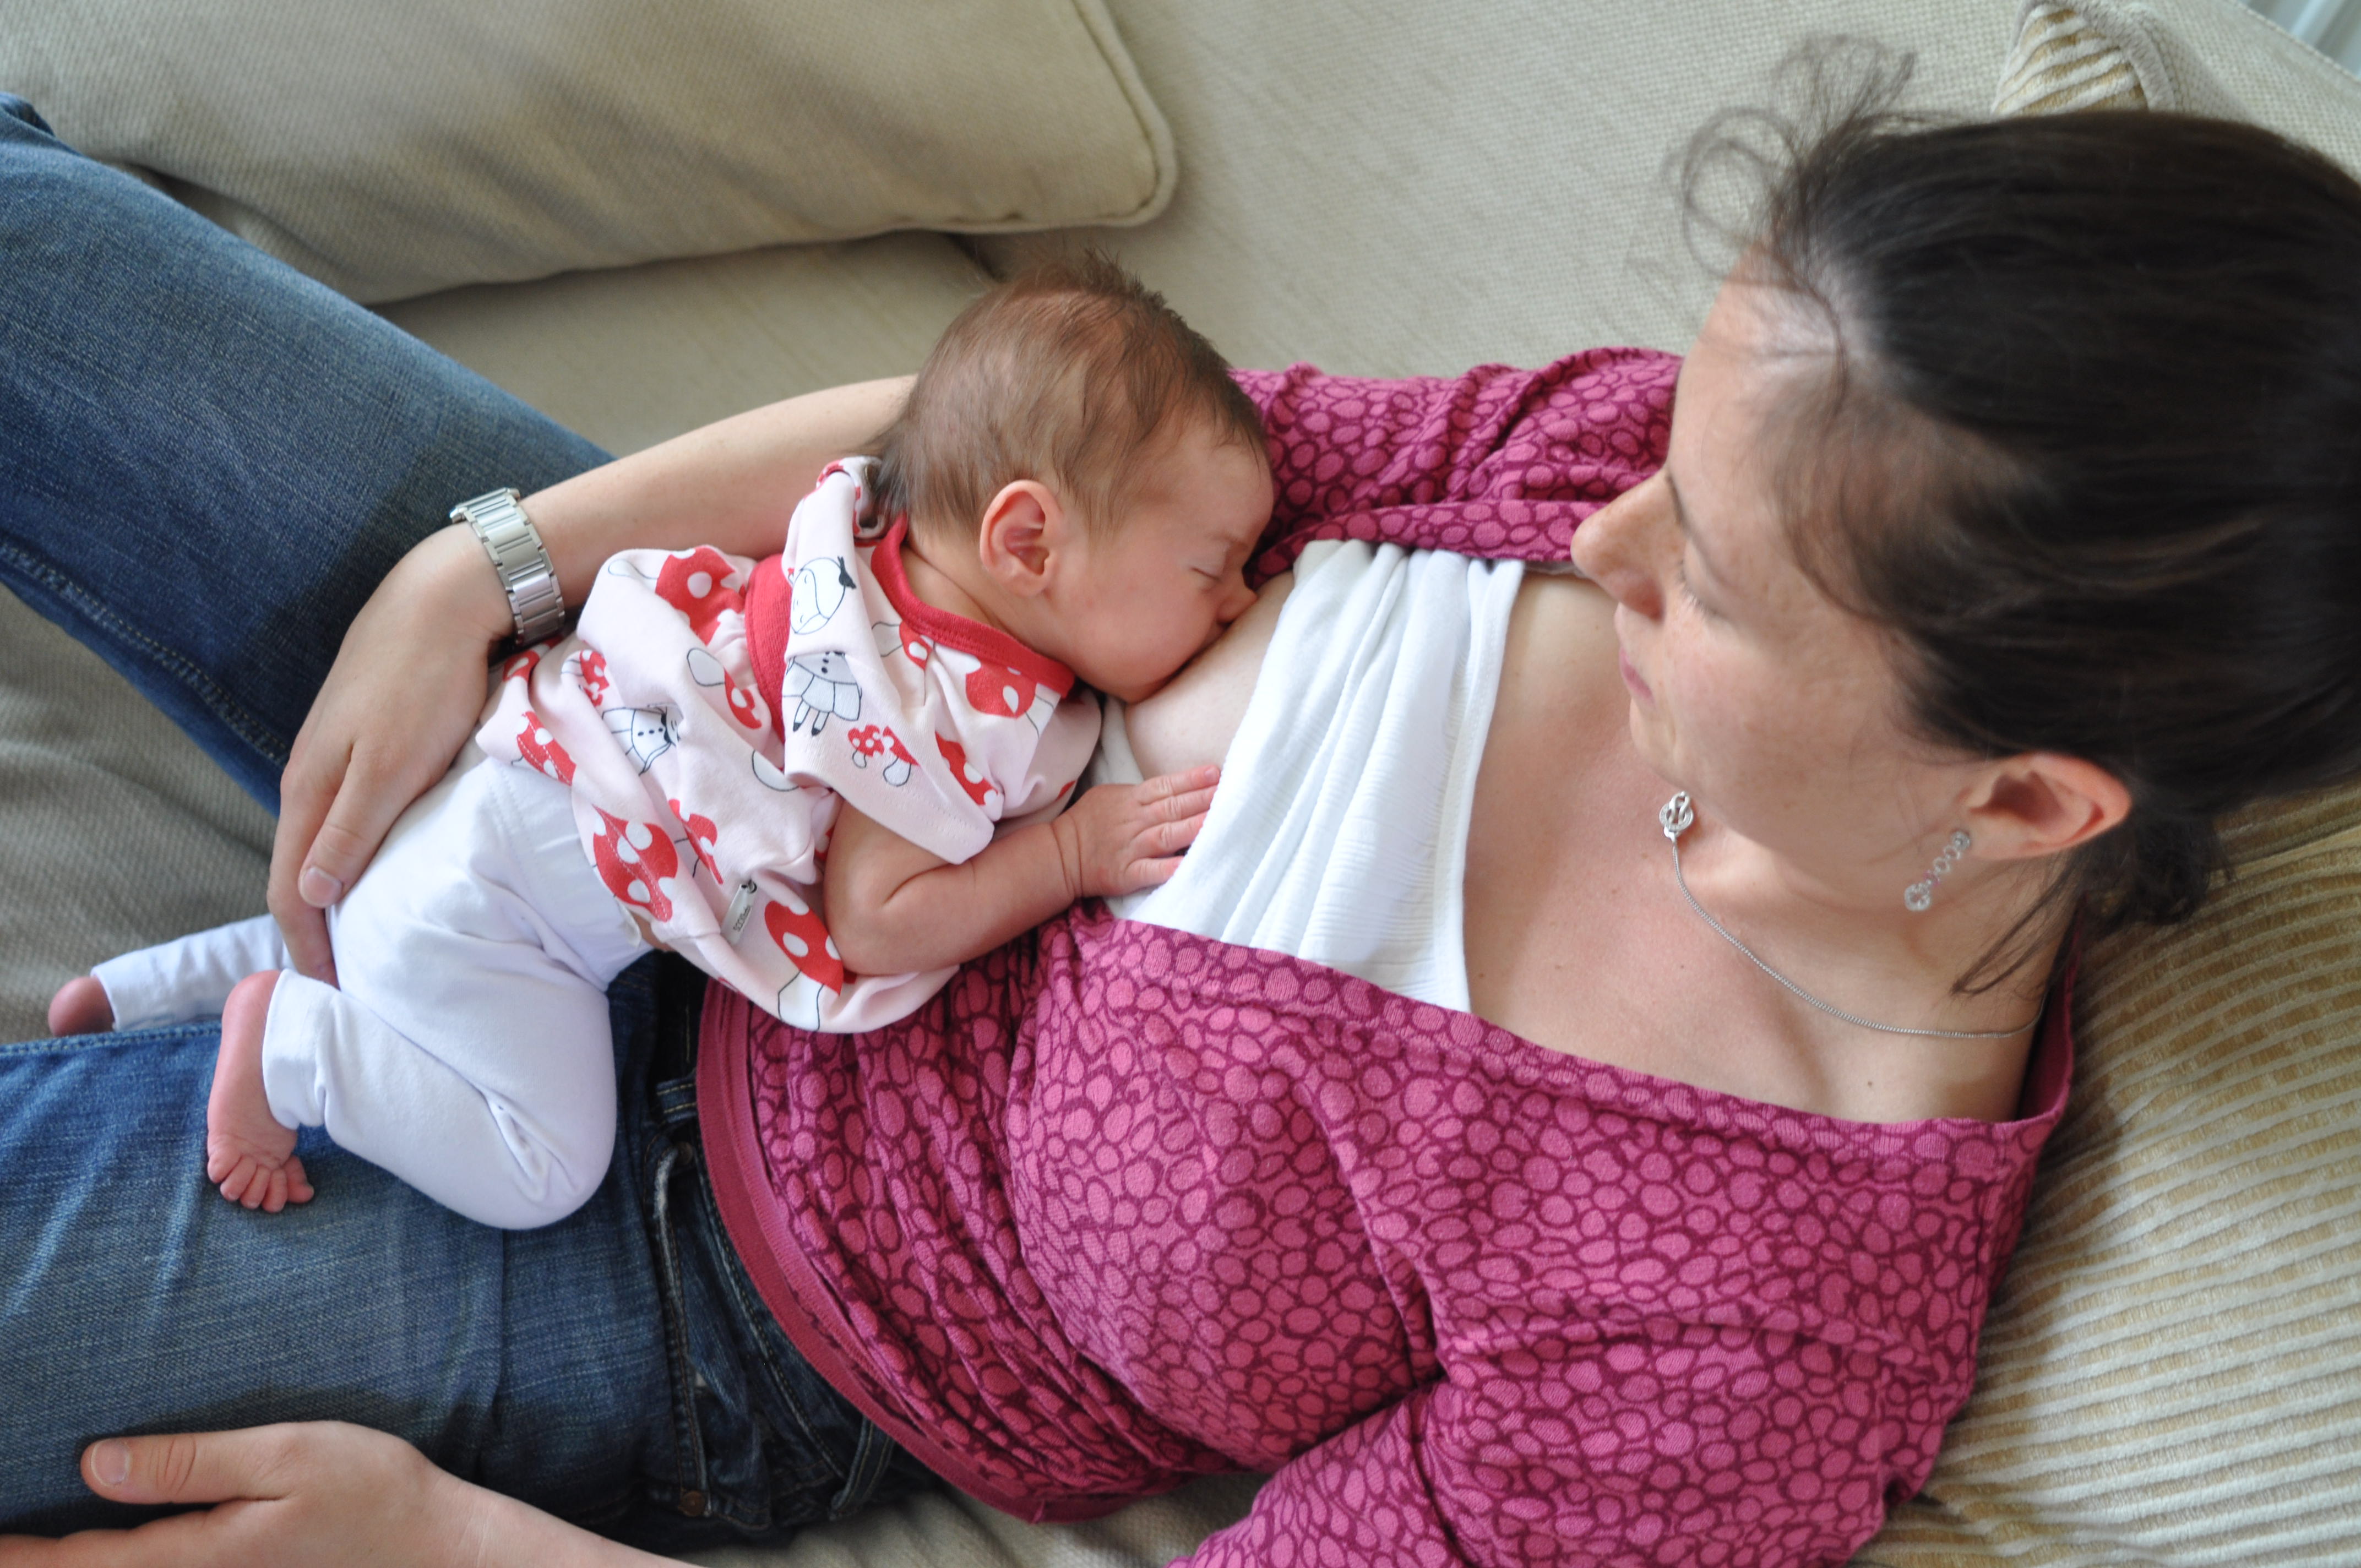 Breastfeeding With Large Breasts